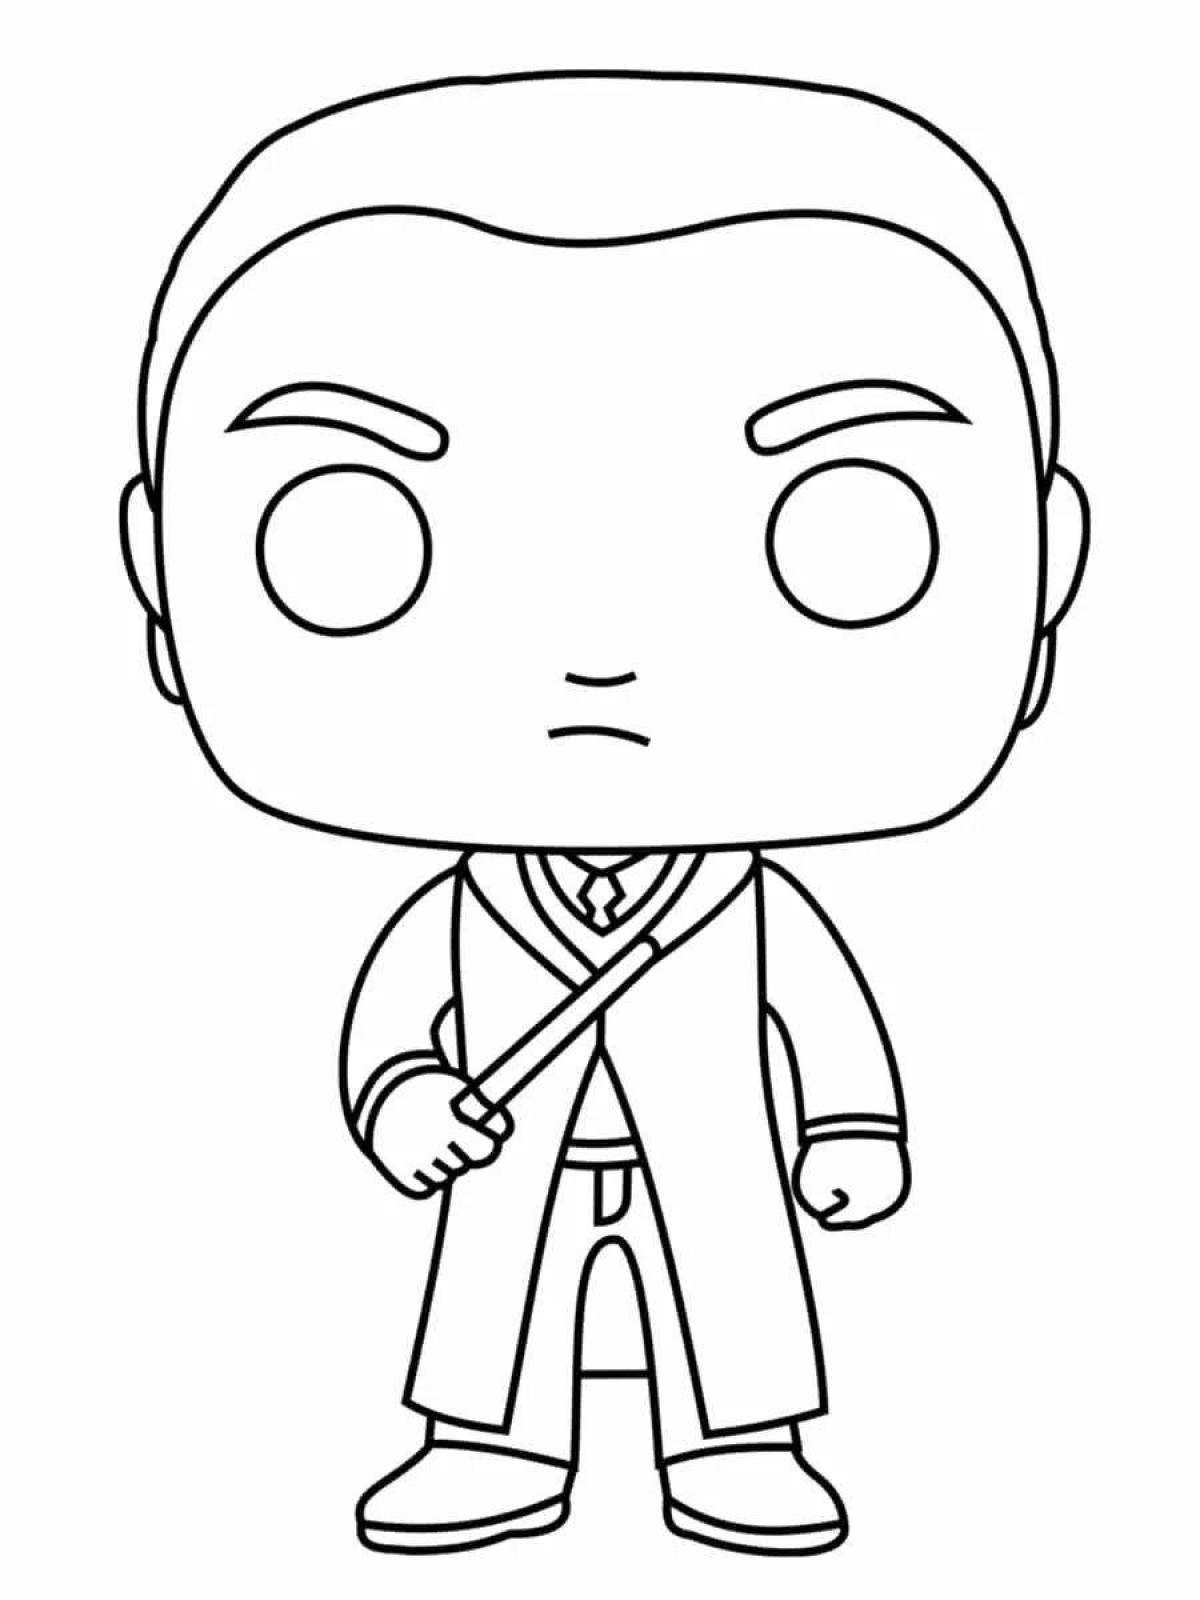 Coloring page playful draco malfoy